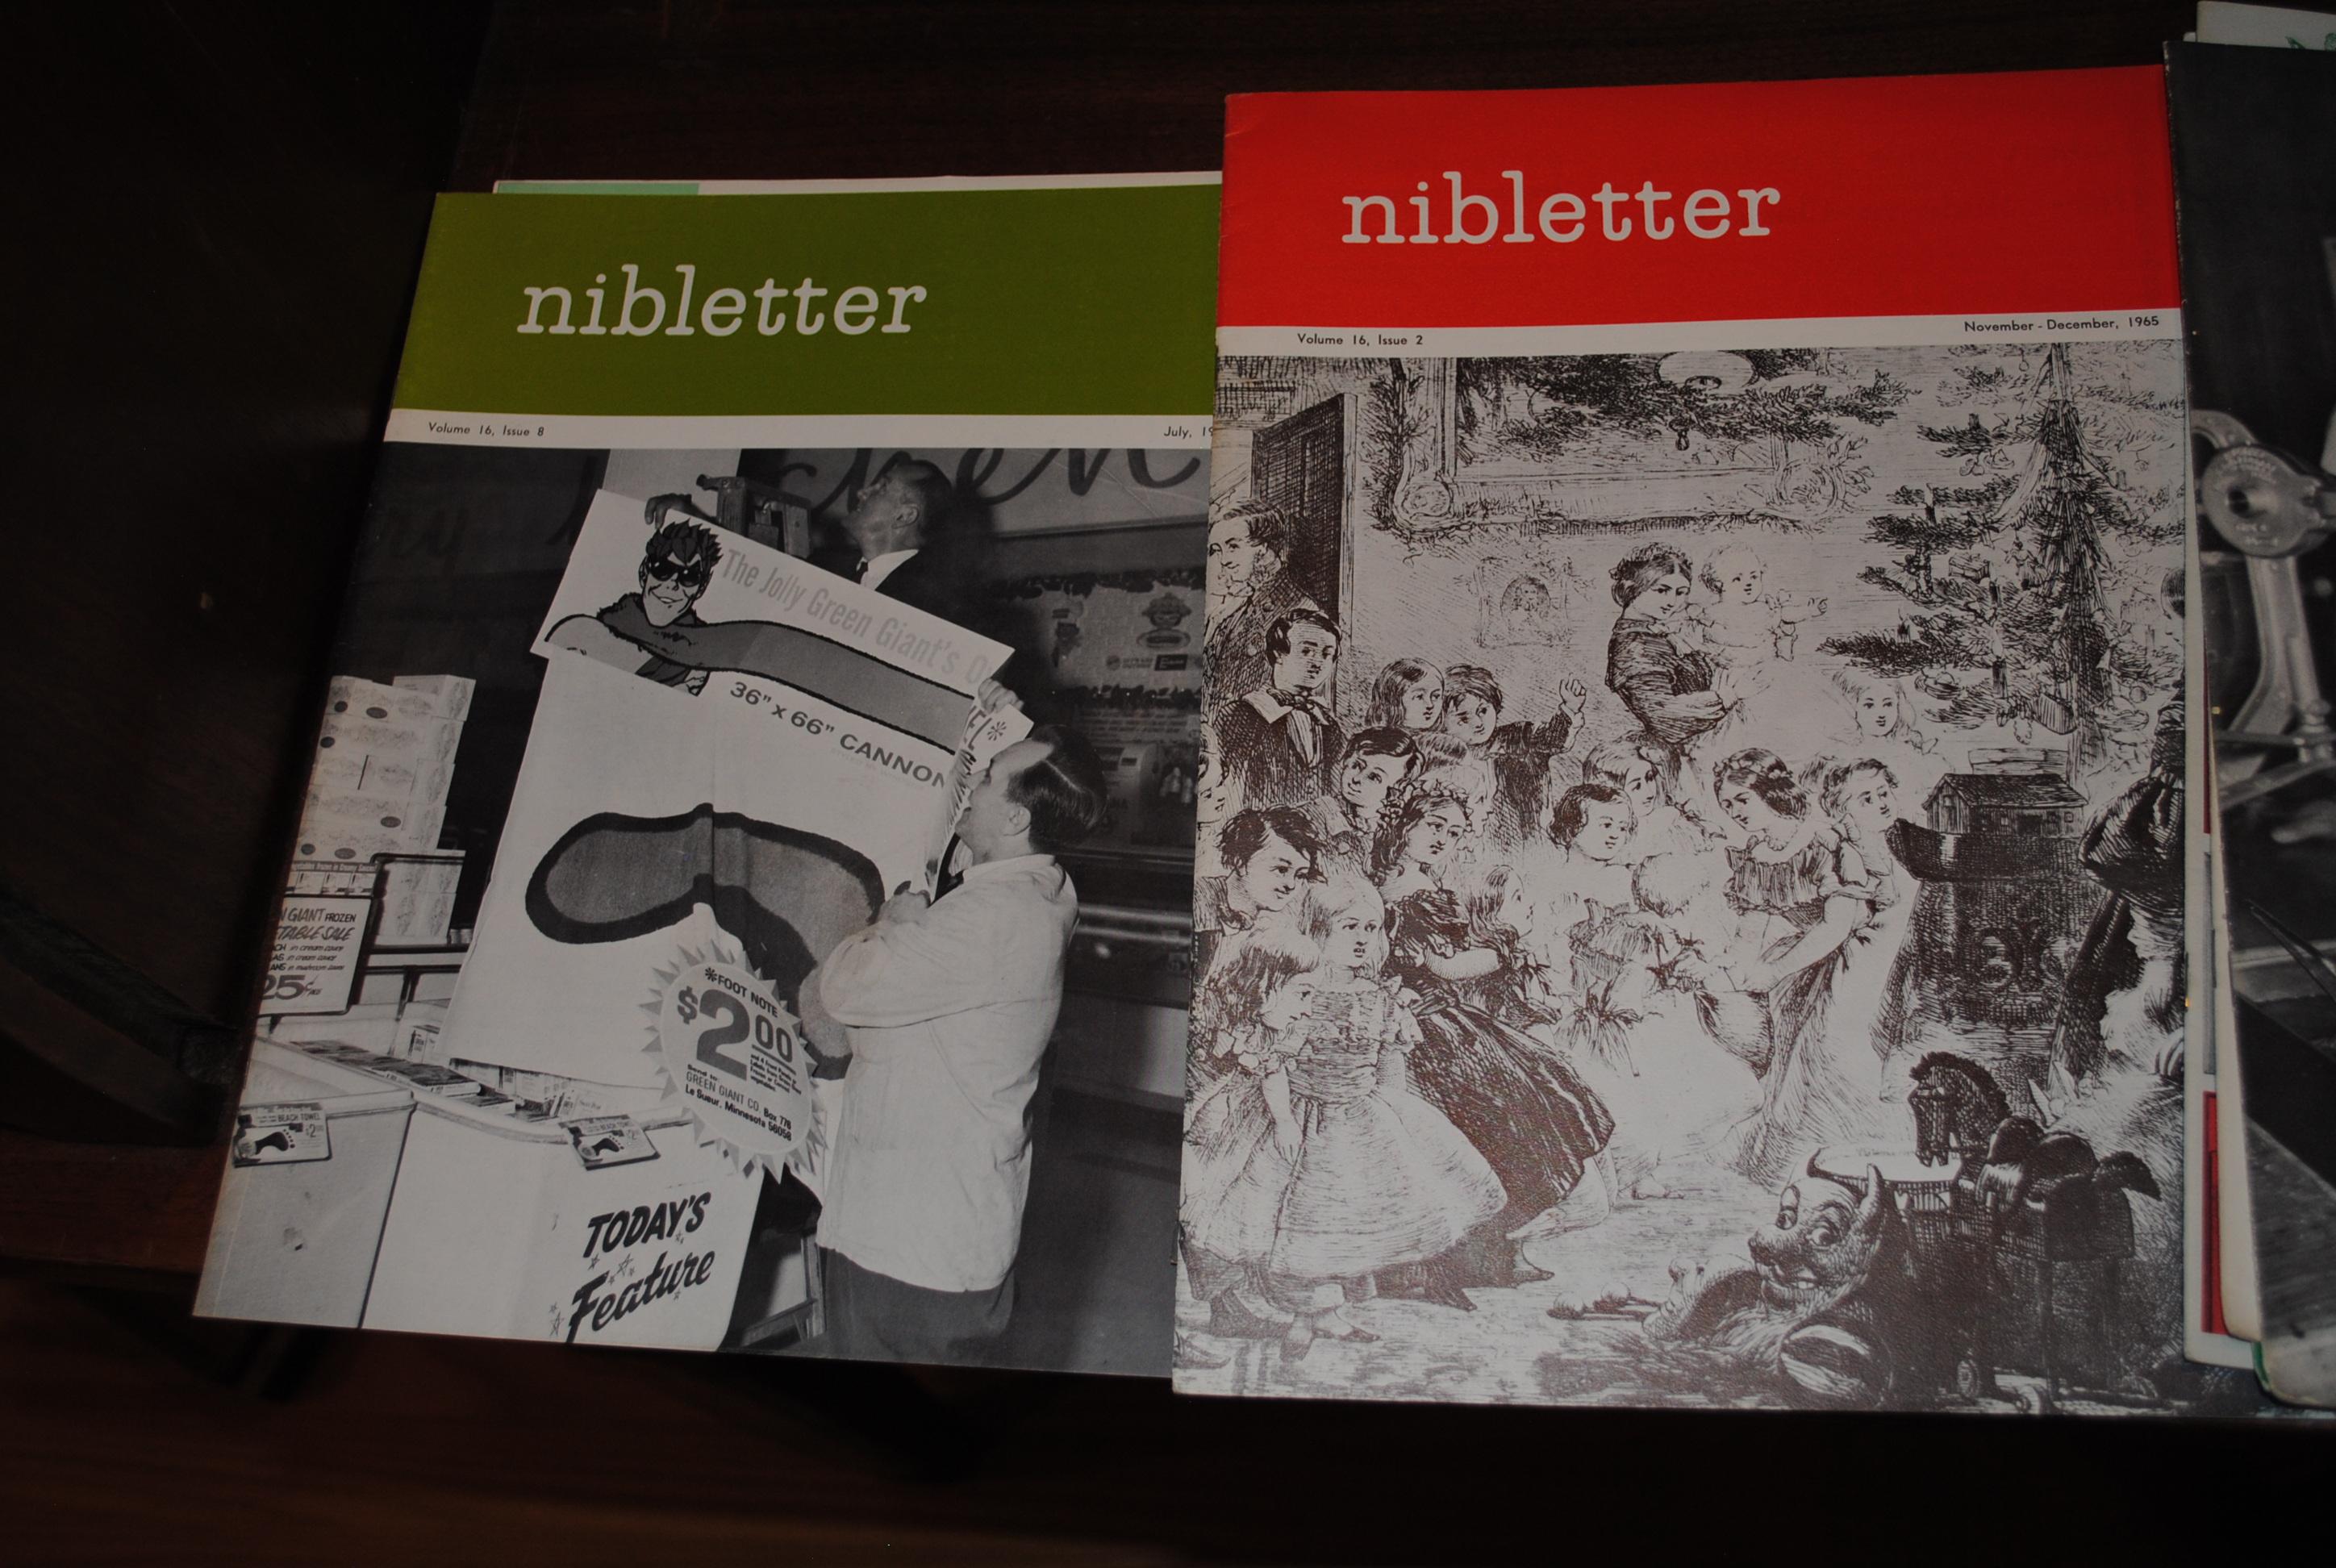 Nibletter from 1960-1968